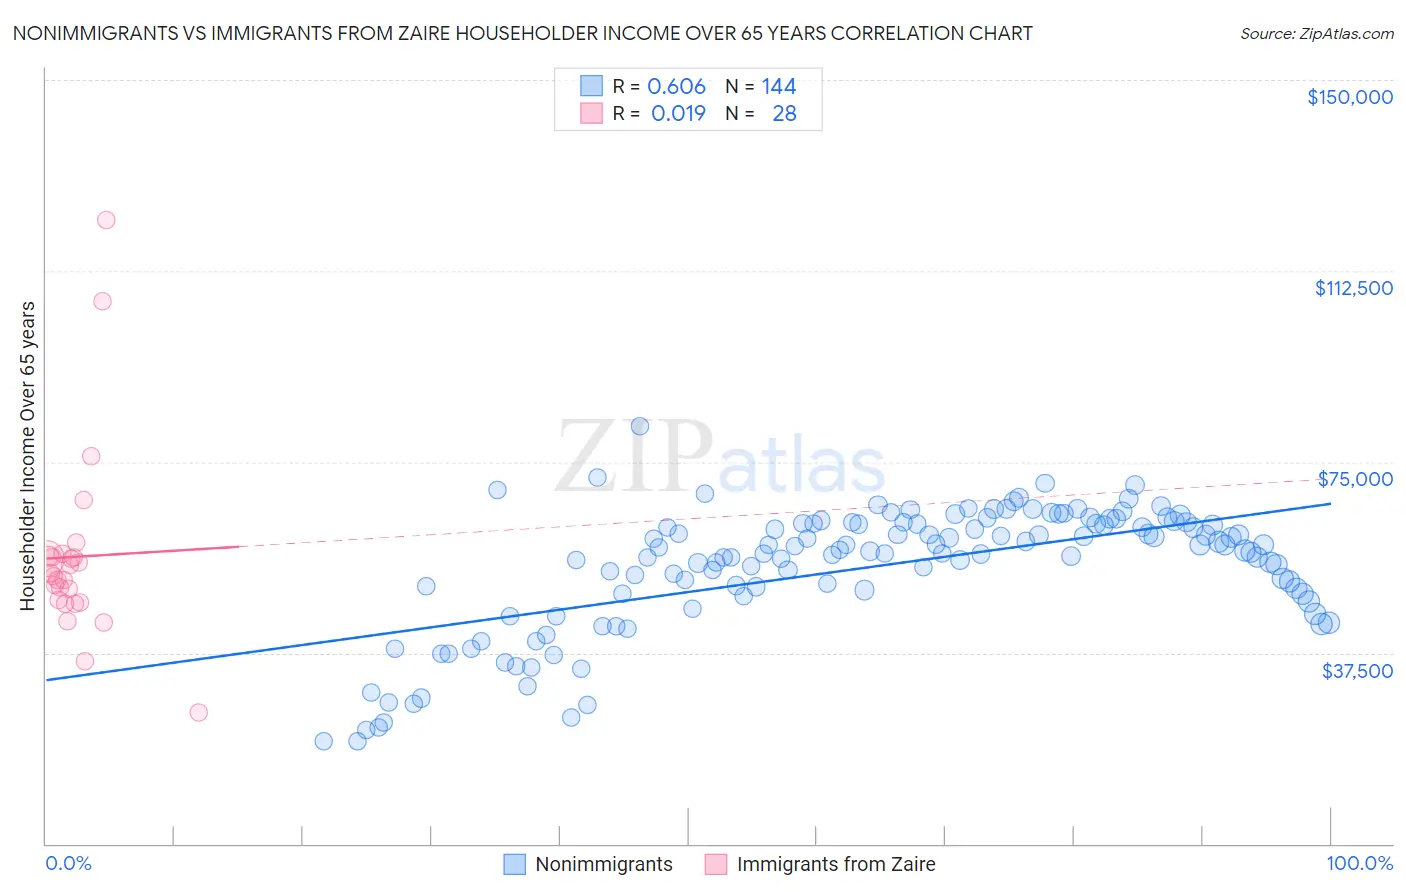 Nonimmigrants vs Immigrants from Zaire Householder Income Over 65 years